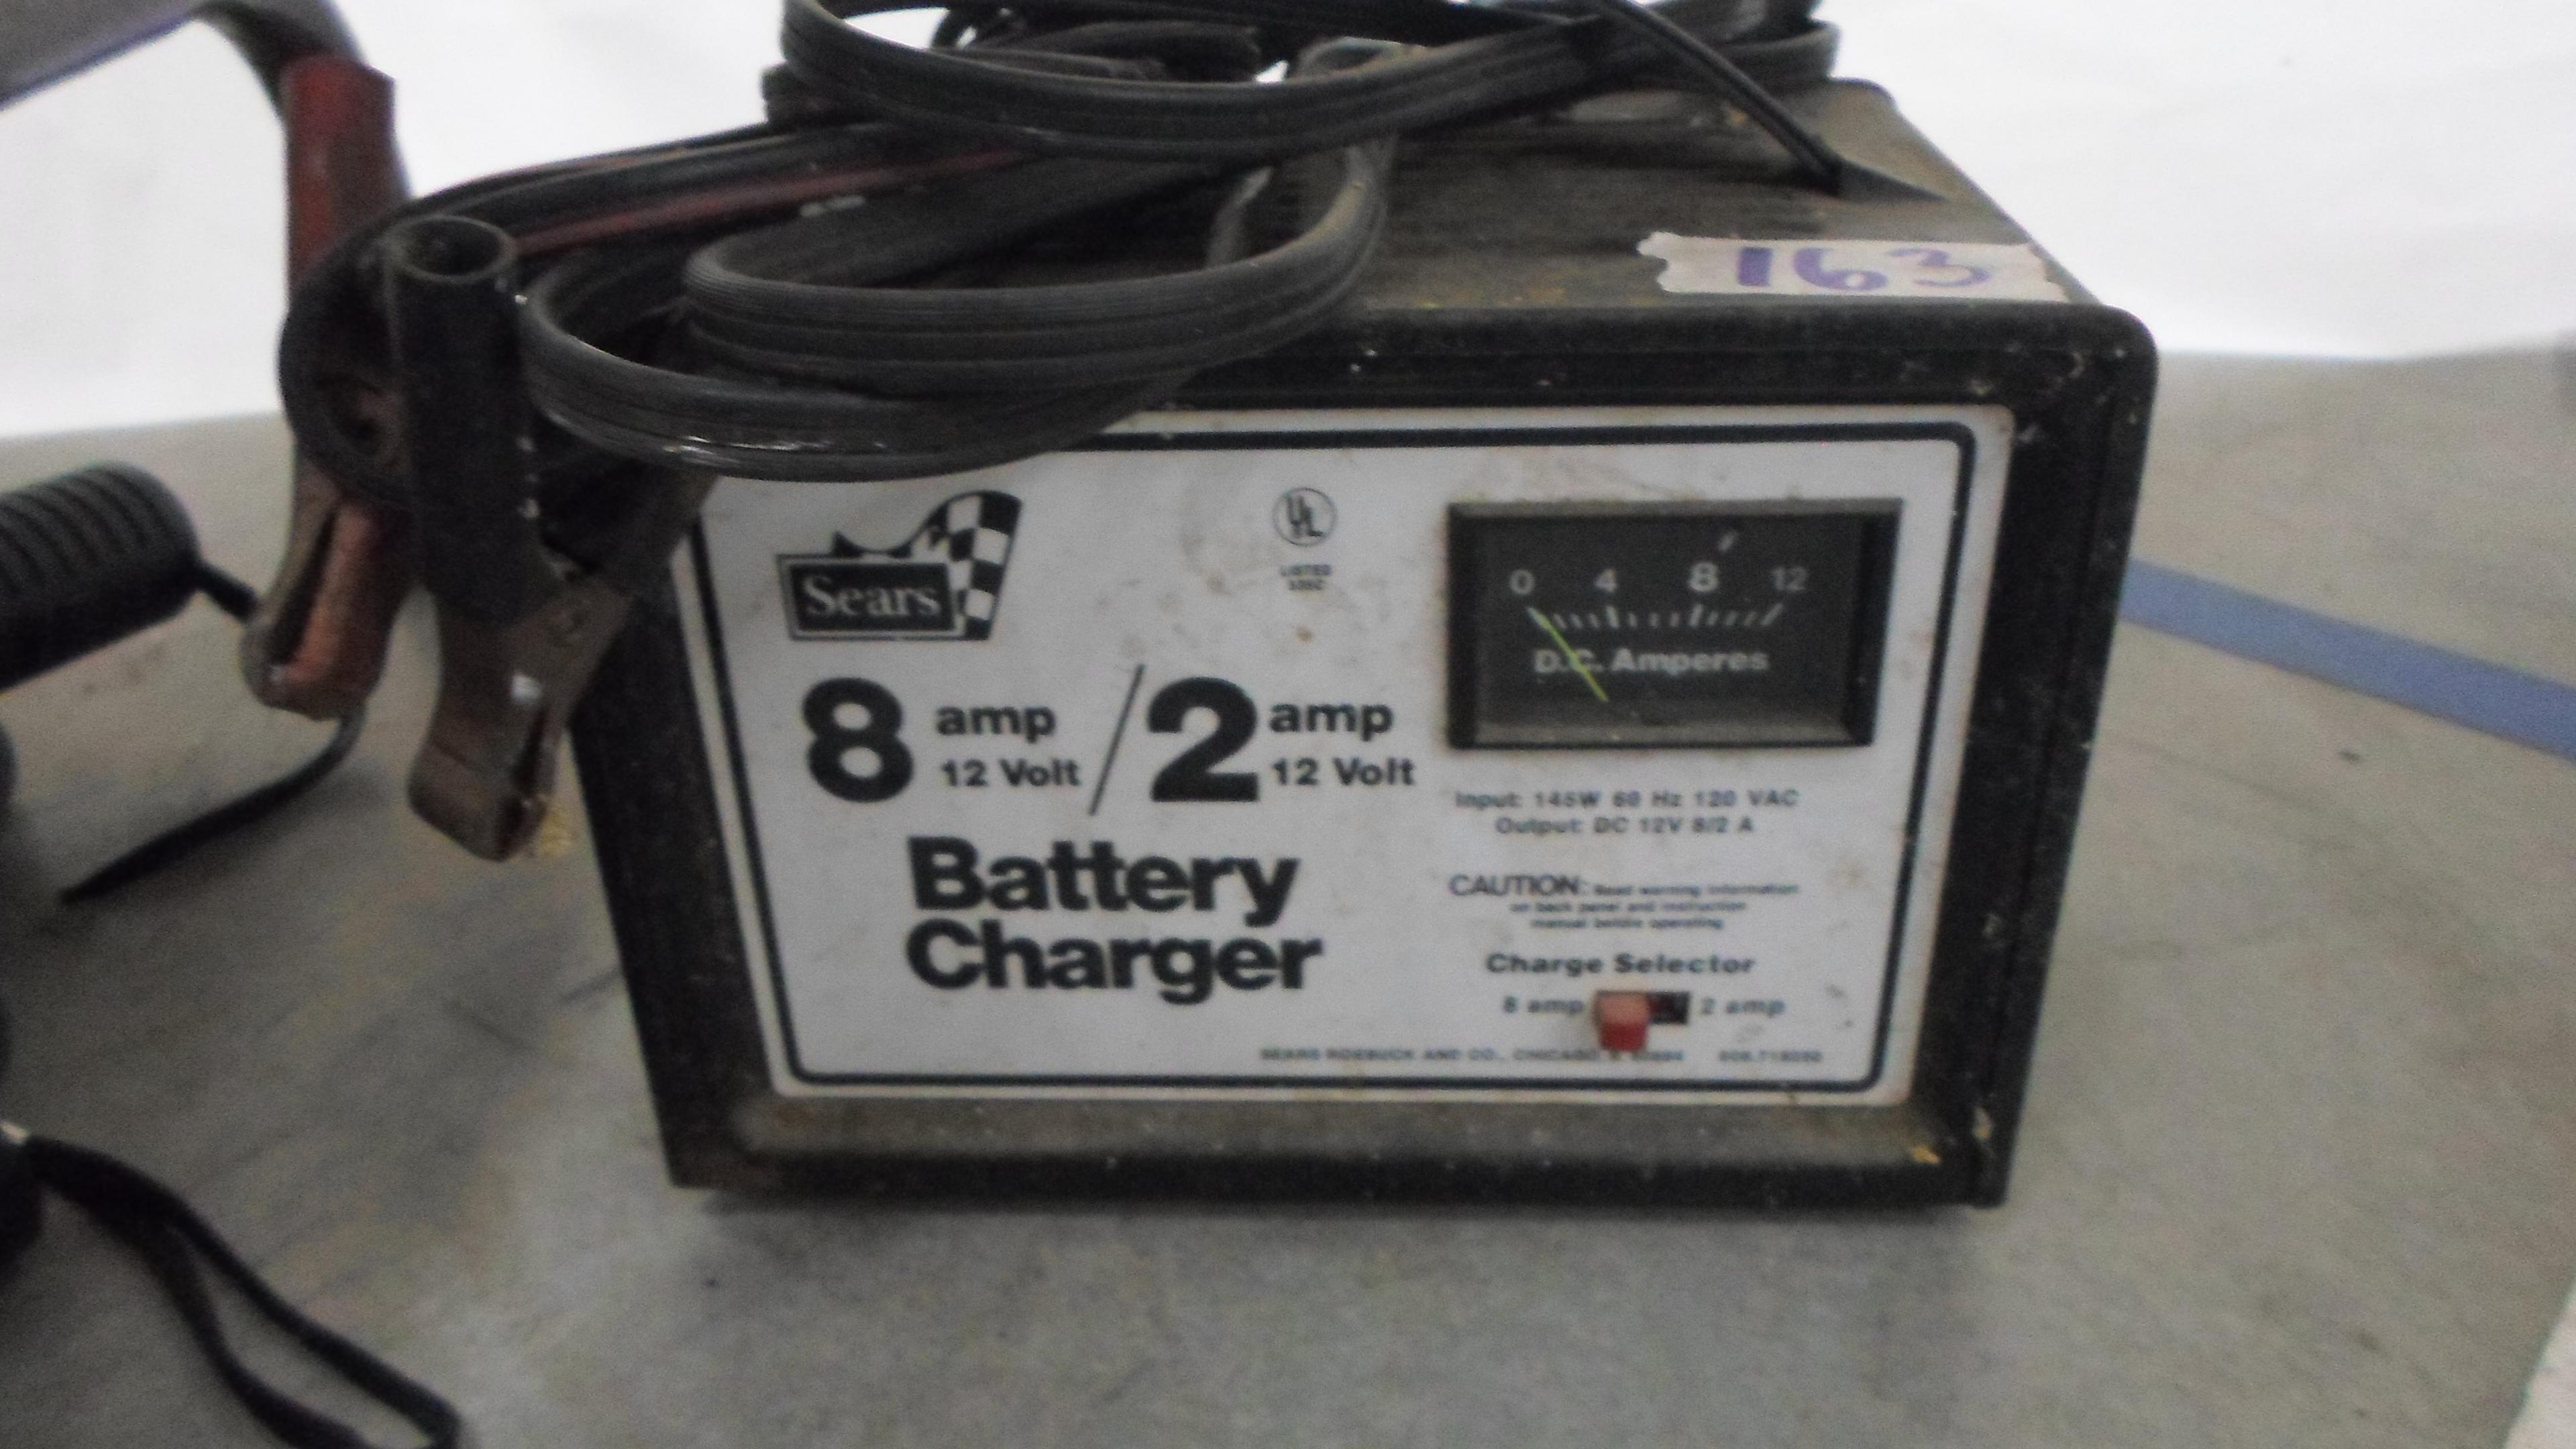 battery charger, 8amp/2amp sears brand